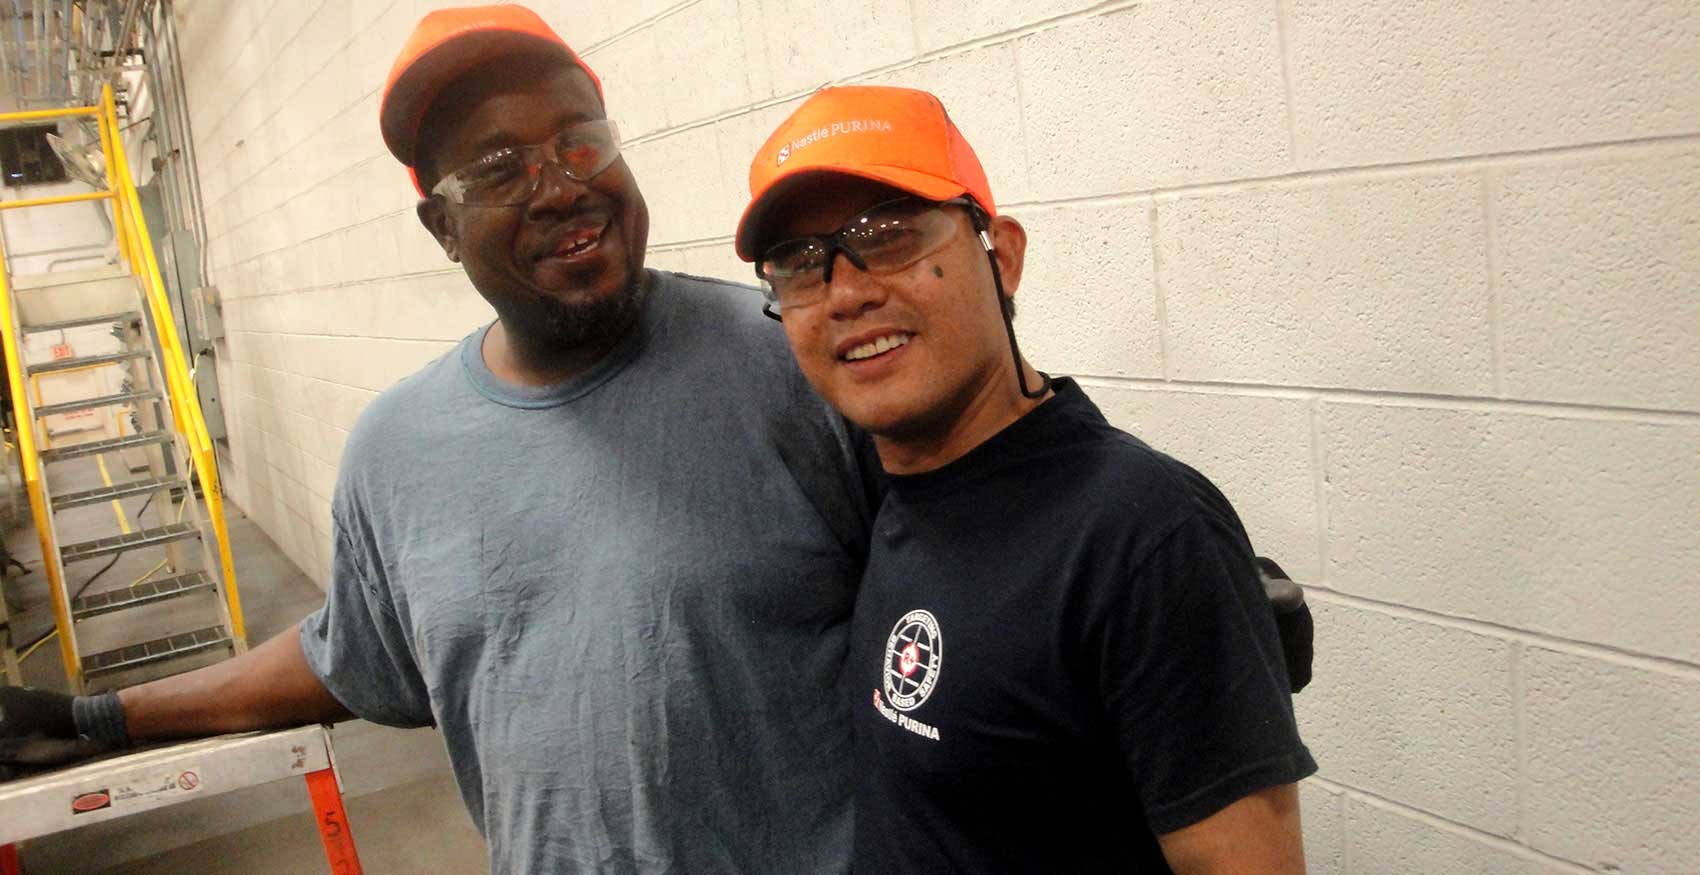 Two men smiling with safety glasses on